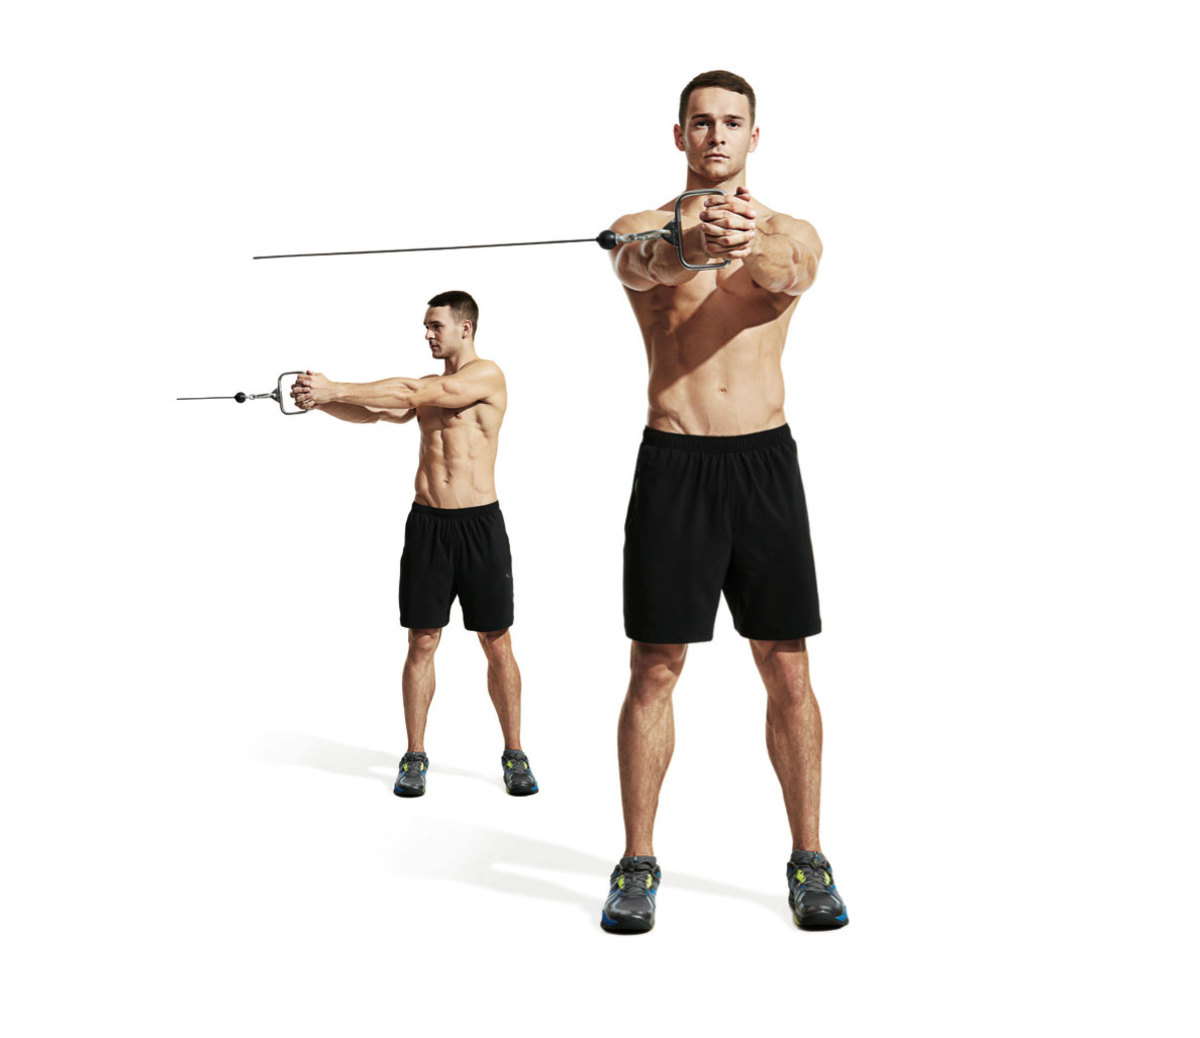 sorpresa combinar golf Cable Ab Workouts: 10 Cable Exercises For Your Core - Men's Journal